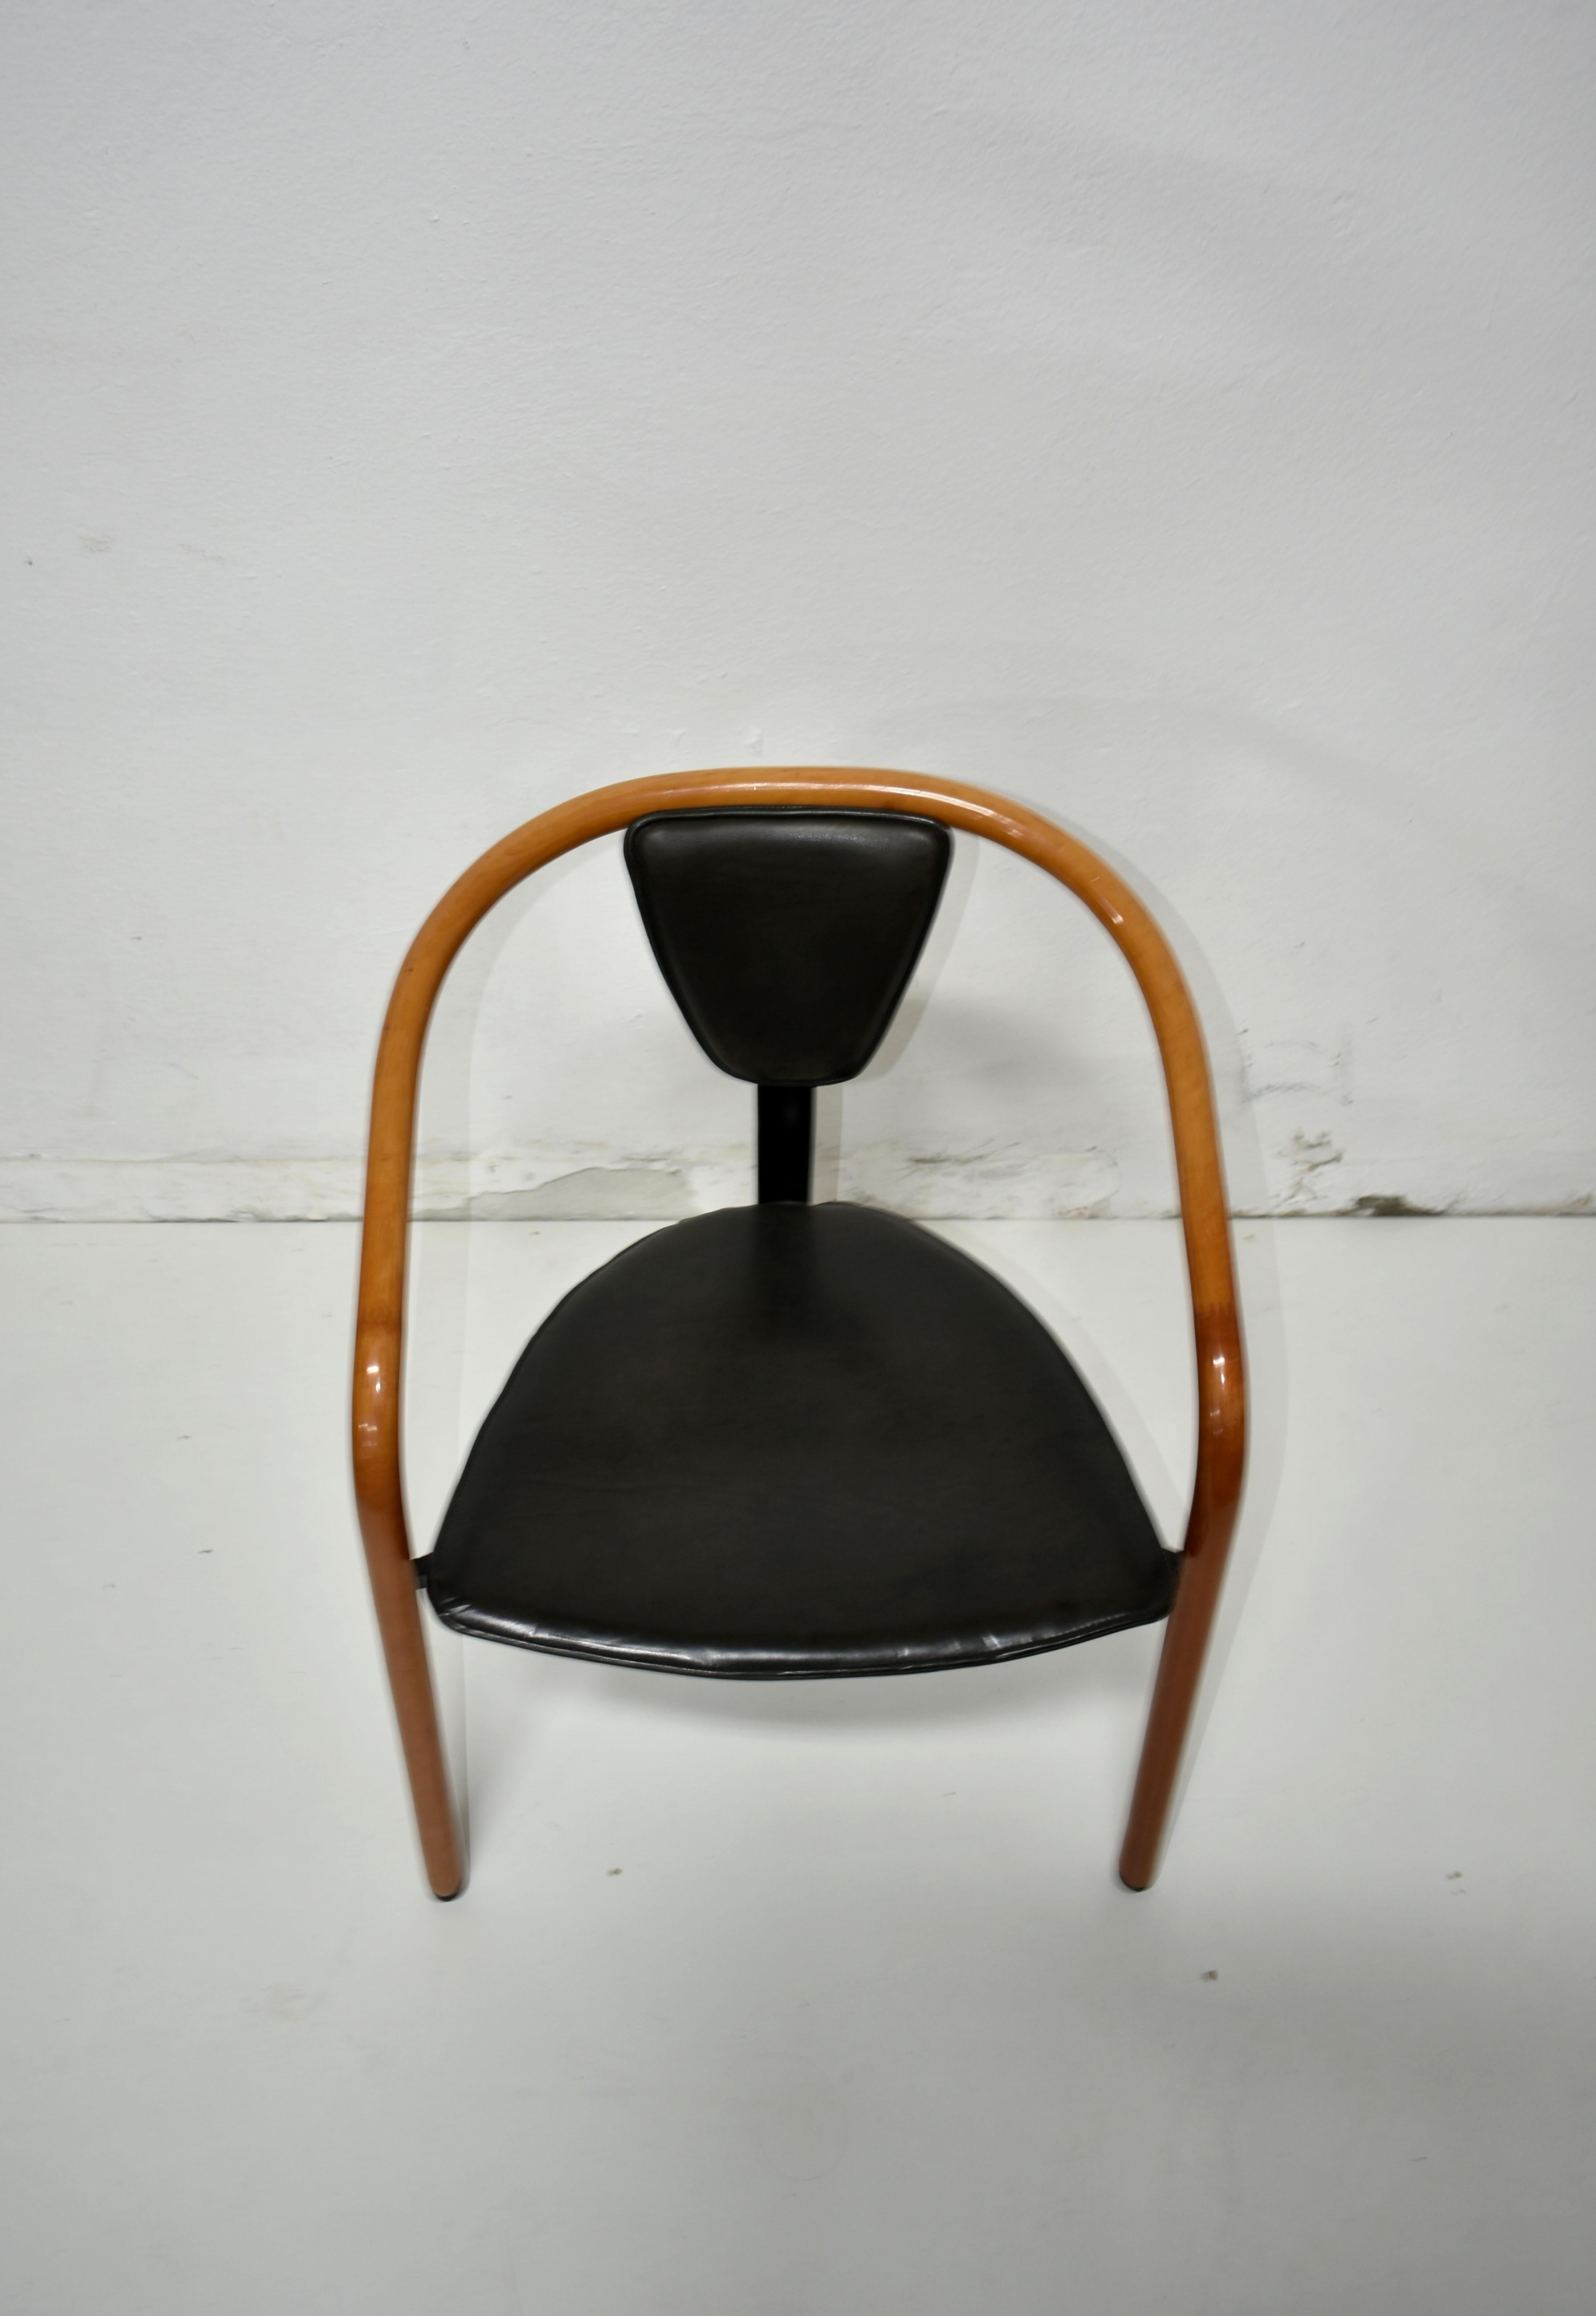 Vintage Postmodern 1980s tripod dining chair ‘Tacchi' by Toshiyuki Kita for AIDEC, Japan.


'Born in Osaka in 1942 Kita’s designs have won international acclaim for both his adherence to sustainable design and his organic, almost faunal forms. As